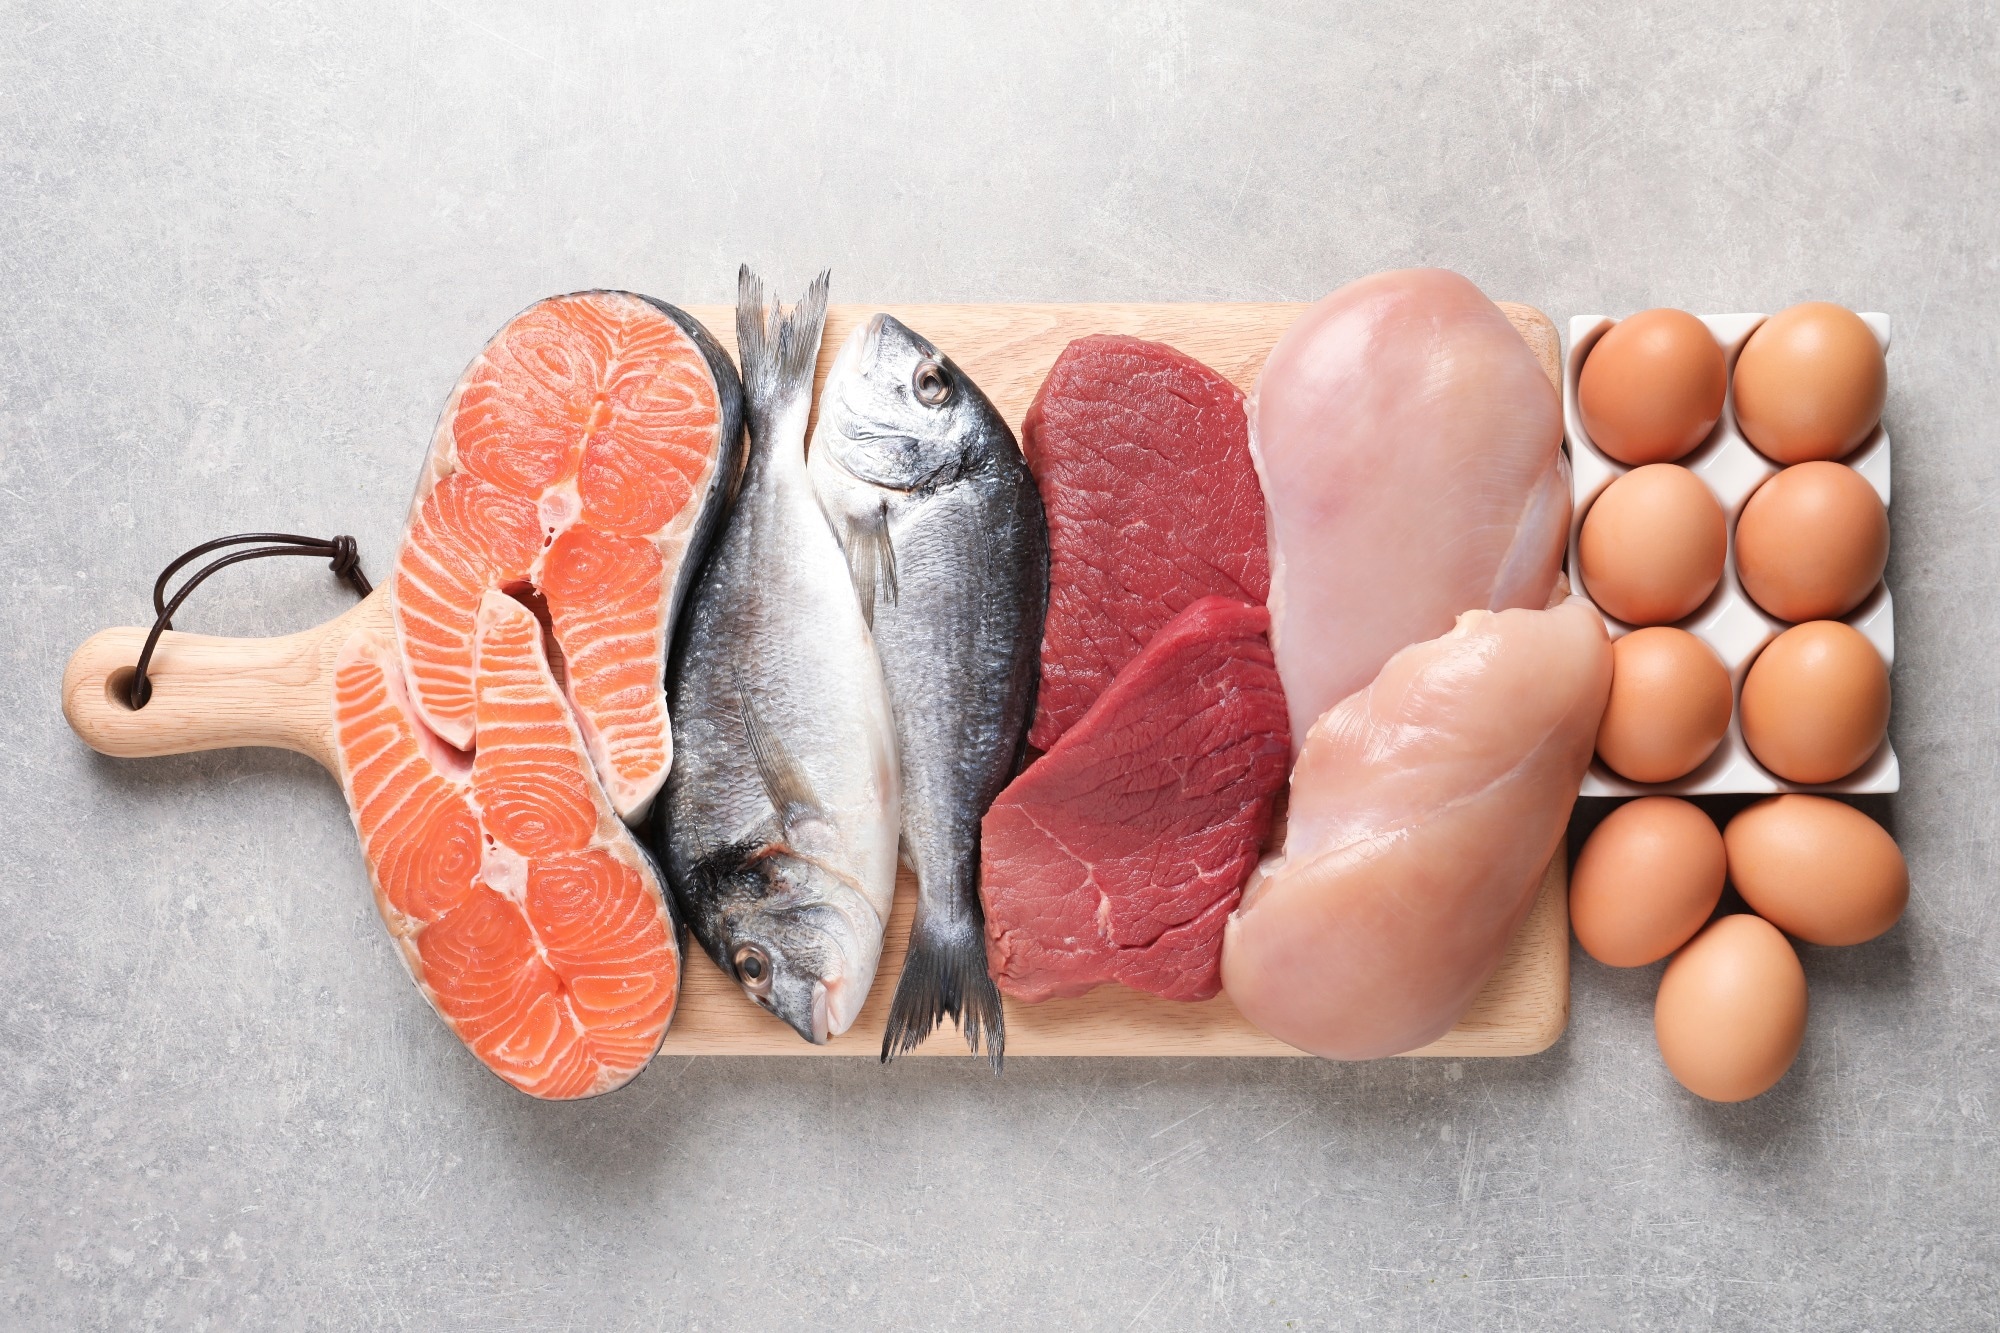 Is there an association between meat and fish consumption and non-alcoholic fatty liver disease?